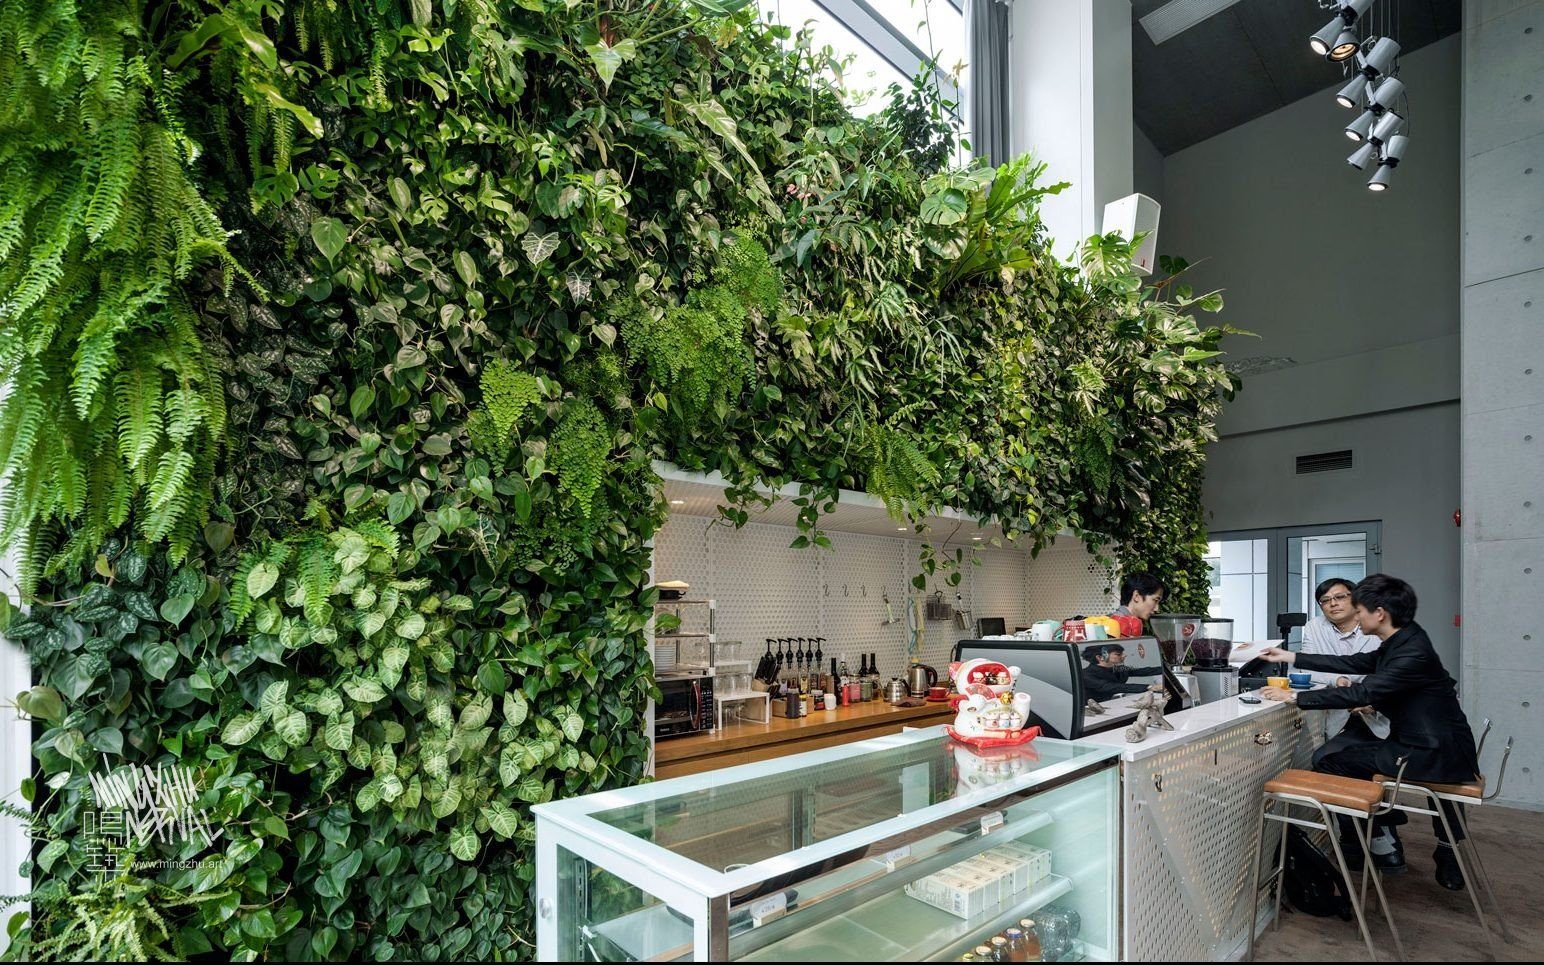 At Mingzhu Nerval, we thrive at creating the most beautiful vertical gardens in the world. For the Tongji International Design Center, we created a pretty living wall design - Shanghai, 2013.